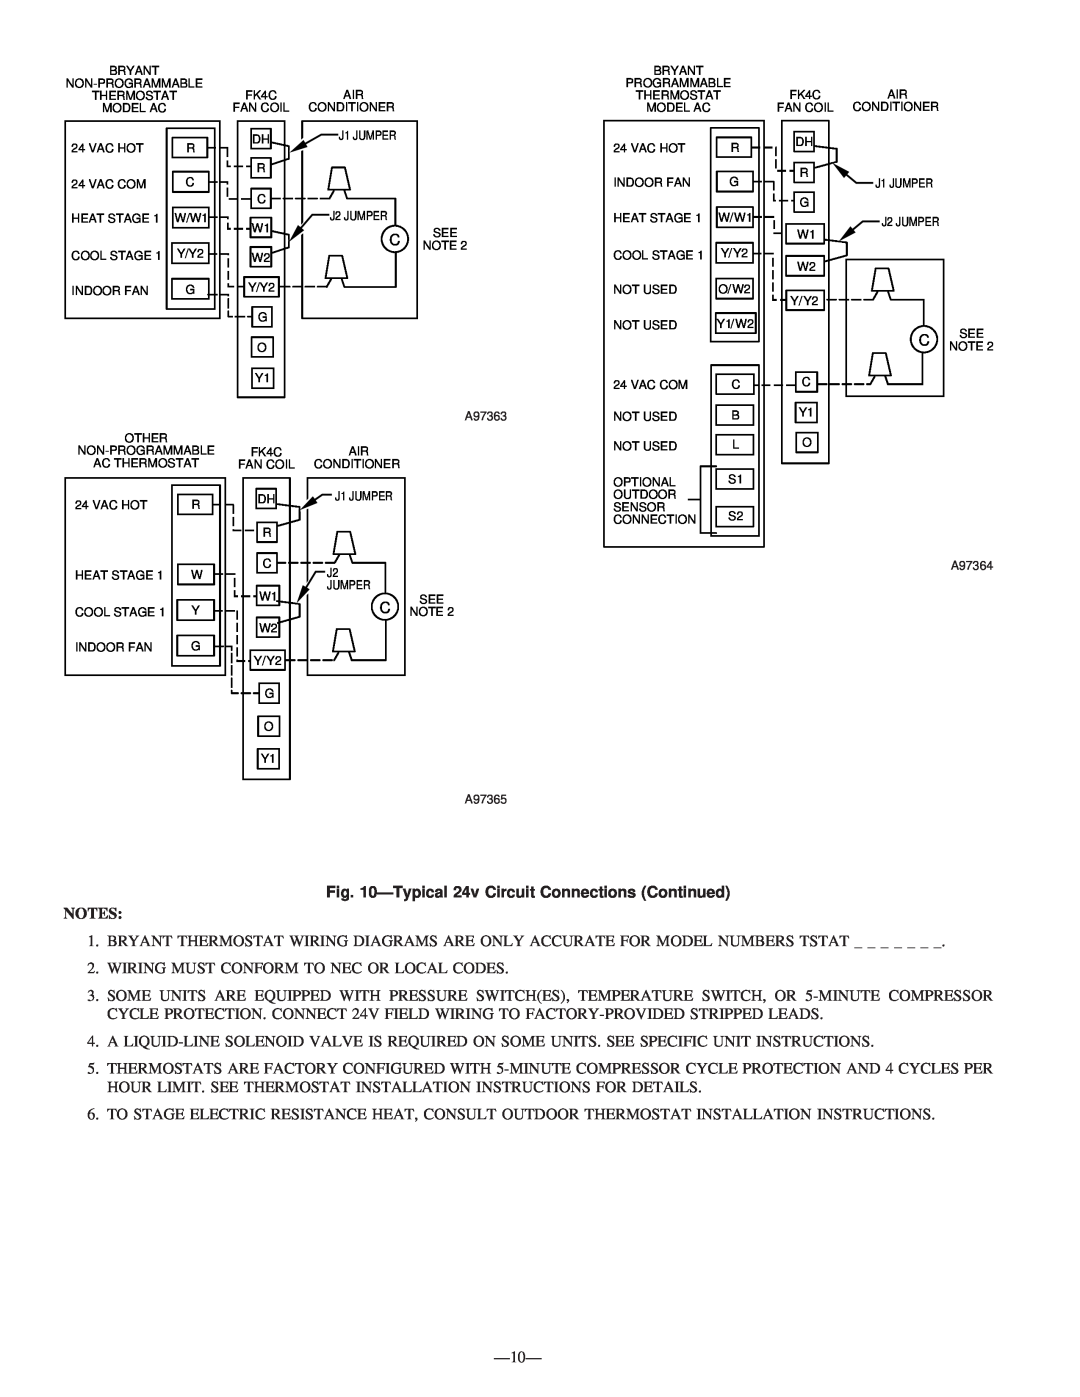 Bryant 591B instruction manual Typical24v Circuit Connections Continued 